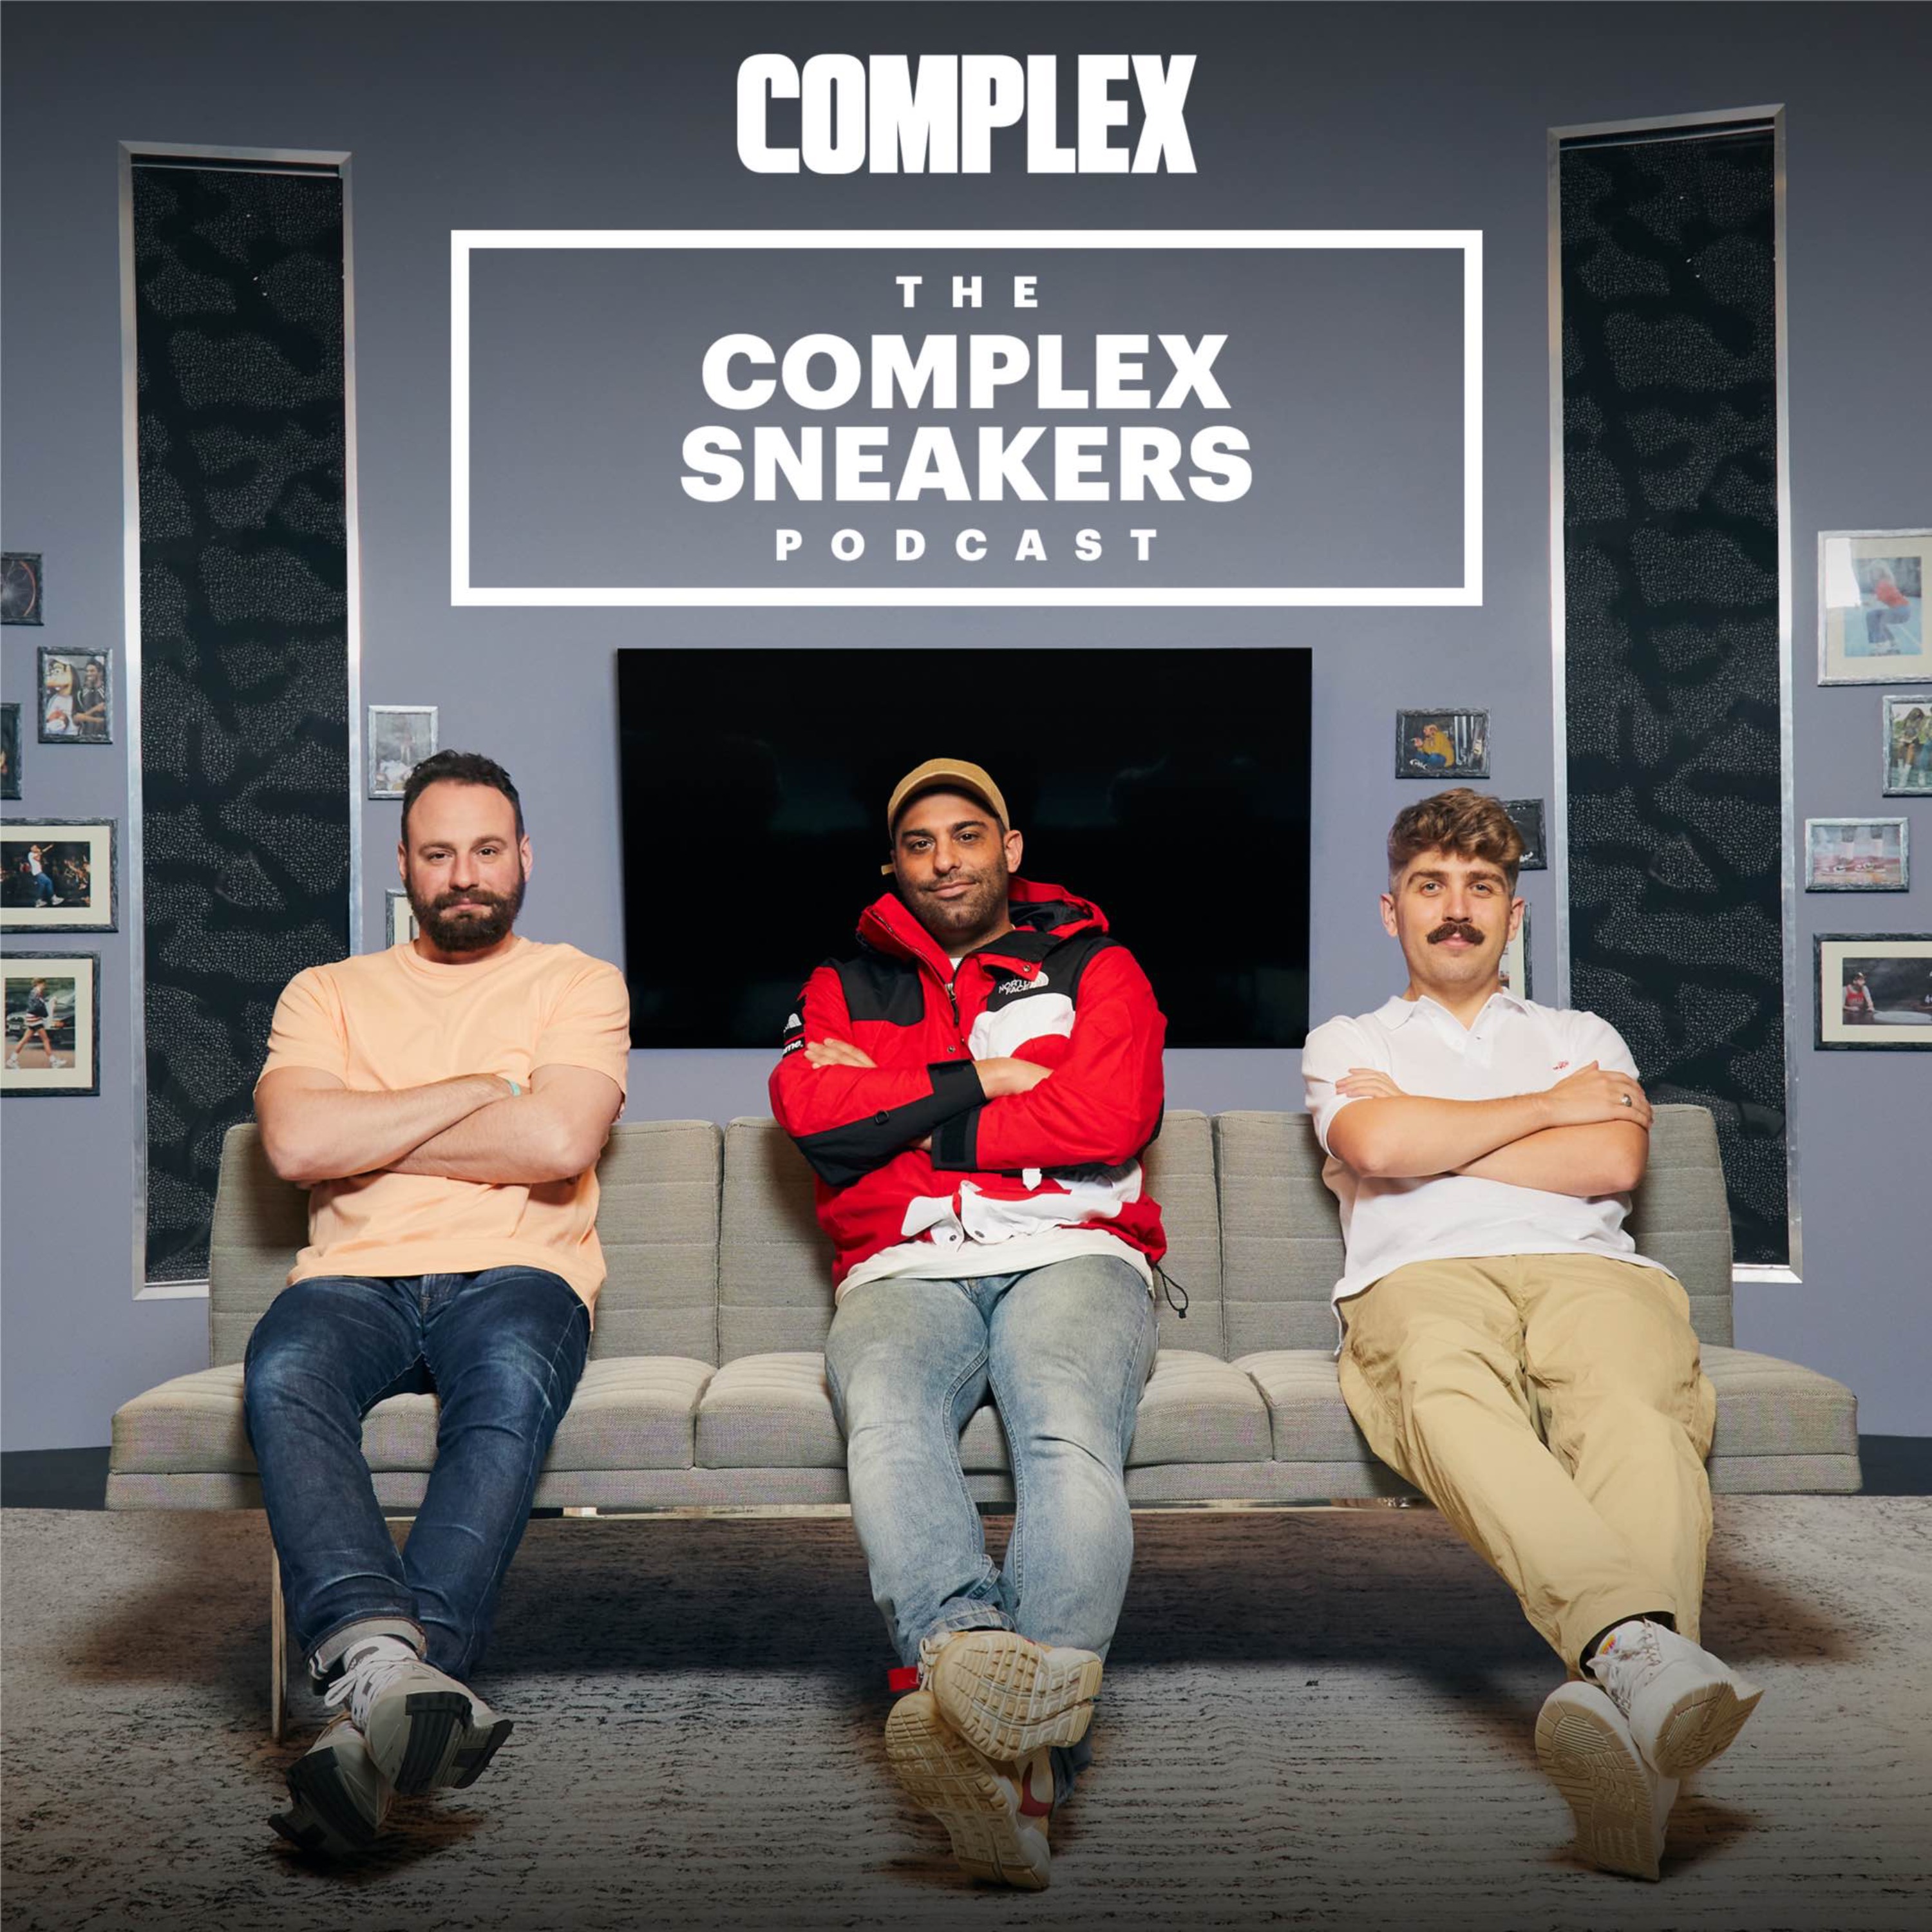 How Ibn Jasper Got His Own Nike SB Air Trainer 2 Sample, Complex Sneakers  Podcast, sneakers, Louis Vuitton, Reebok, Nike, podcasting